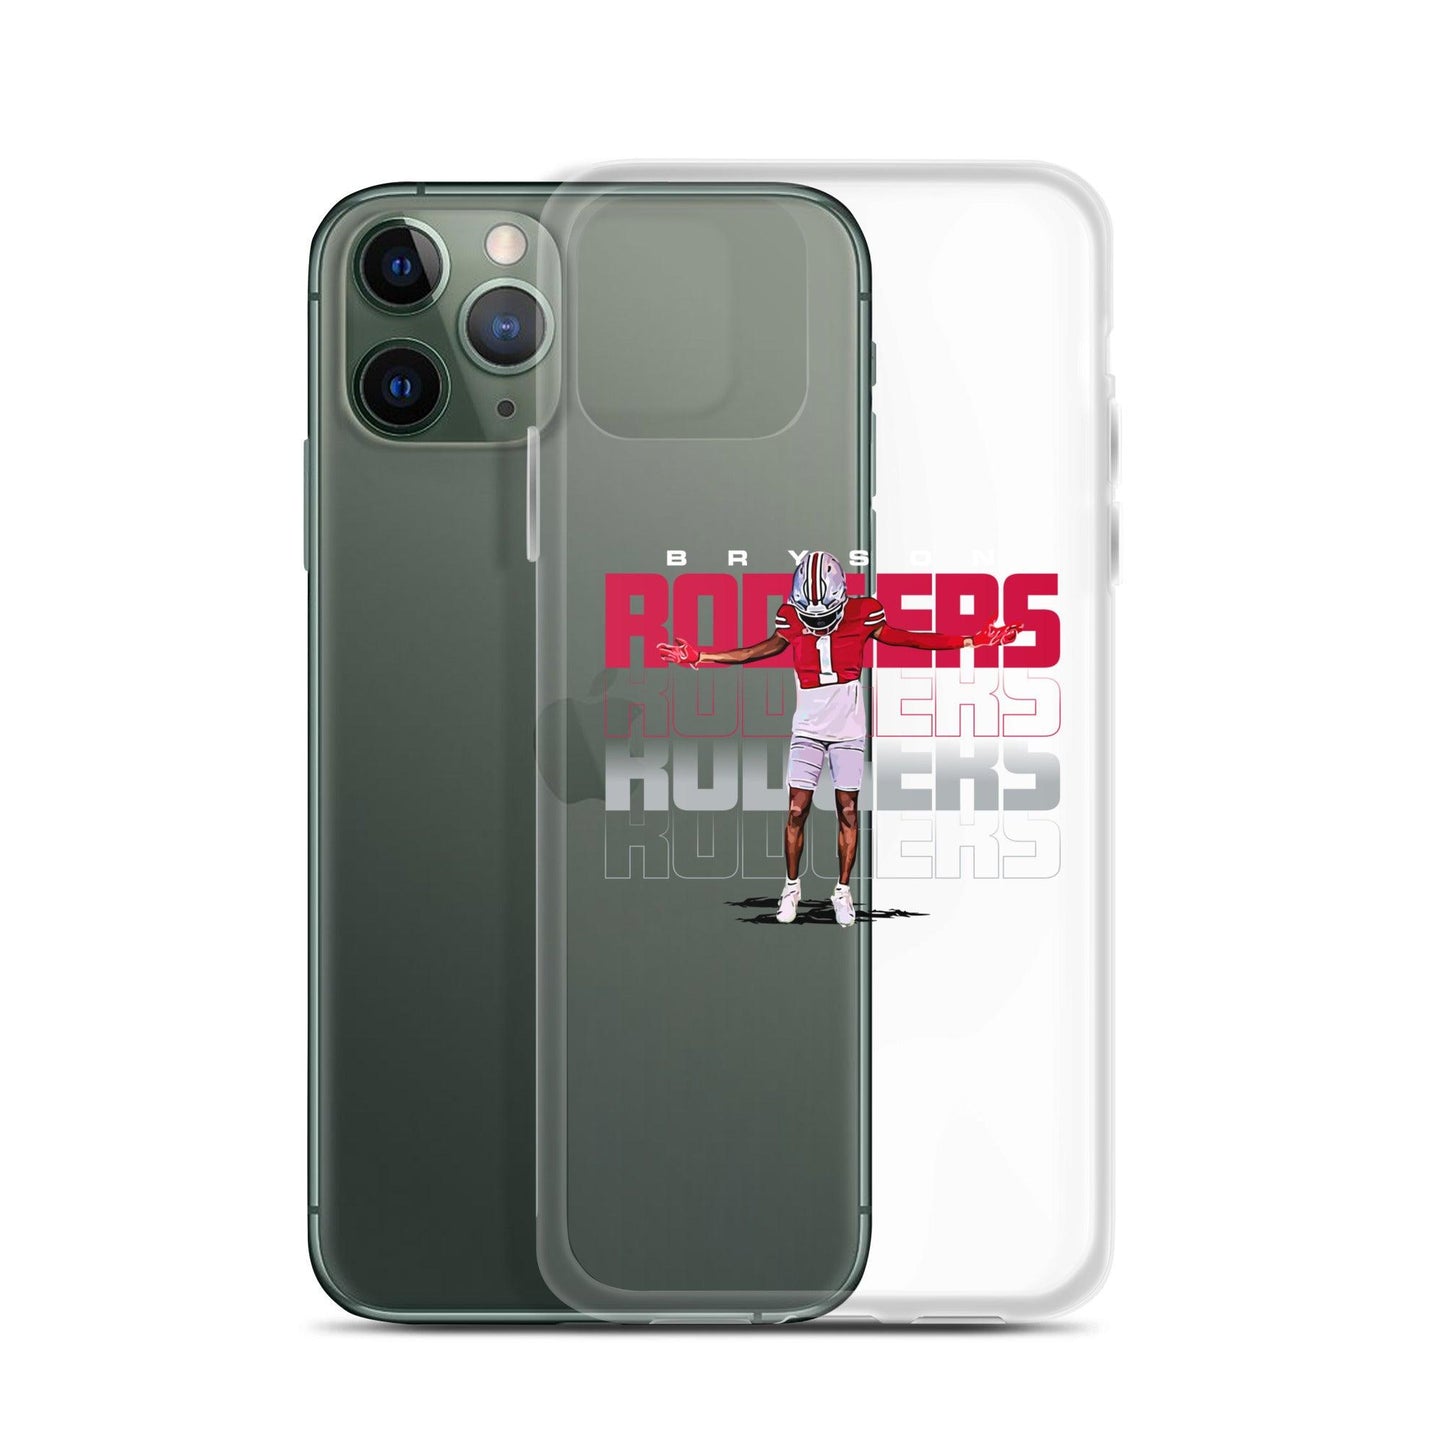 Bryson Rodgers "Gameday" iPhone Case - Fan Arch